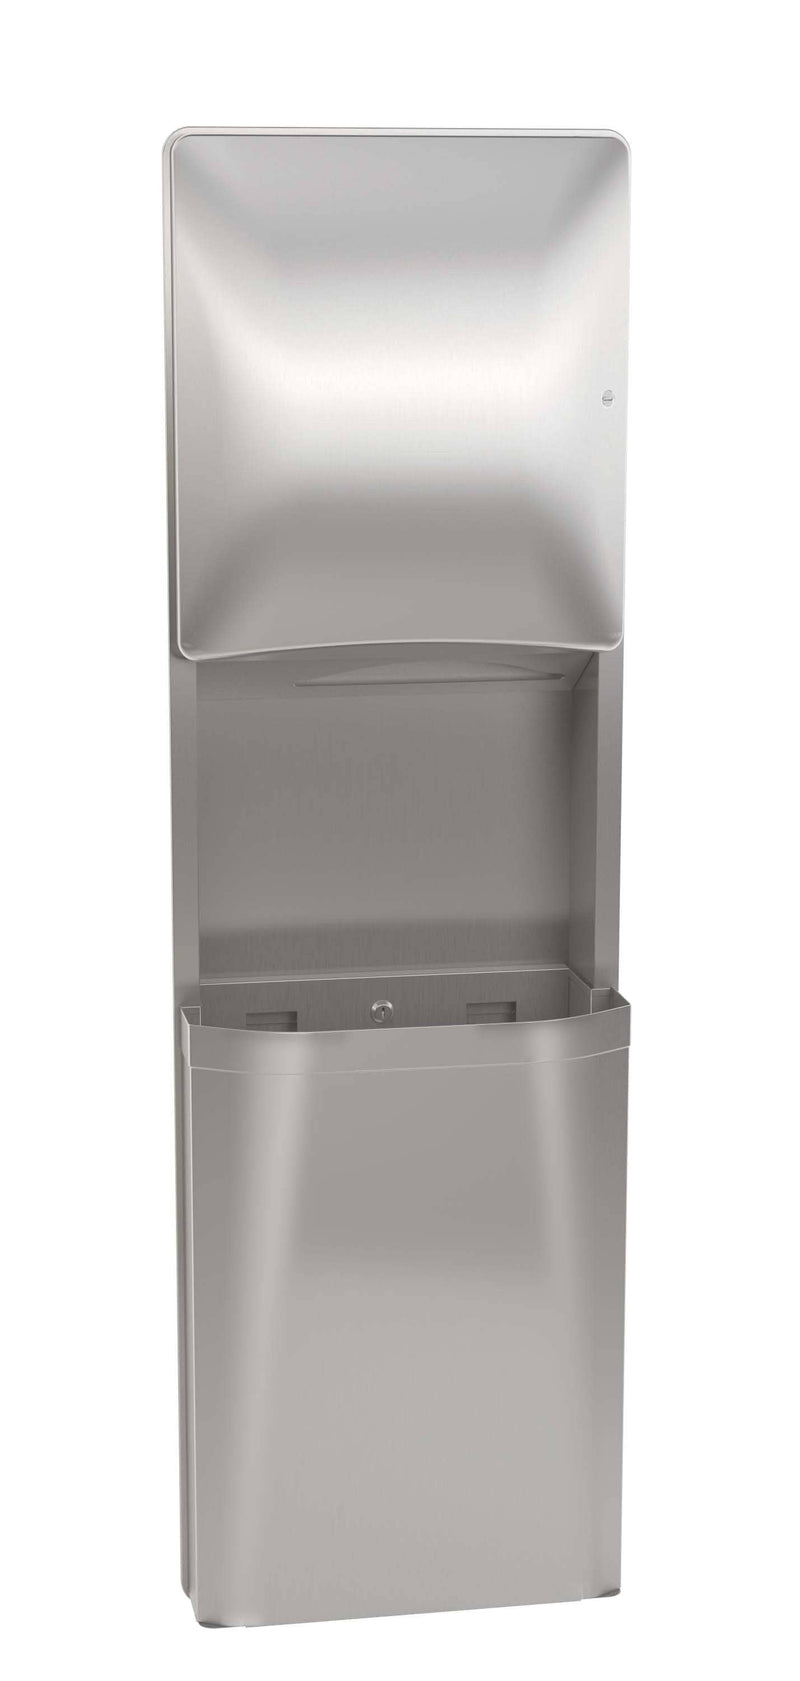 Bradley 2A15-1036 Combination Toilet Paper Dispenser/Waste Receptacle, Semi-Recessed-Mounted, Stainless Steel - TotalRestroom.com